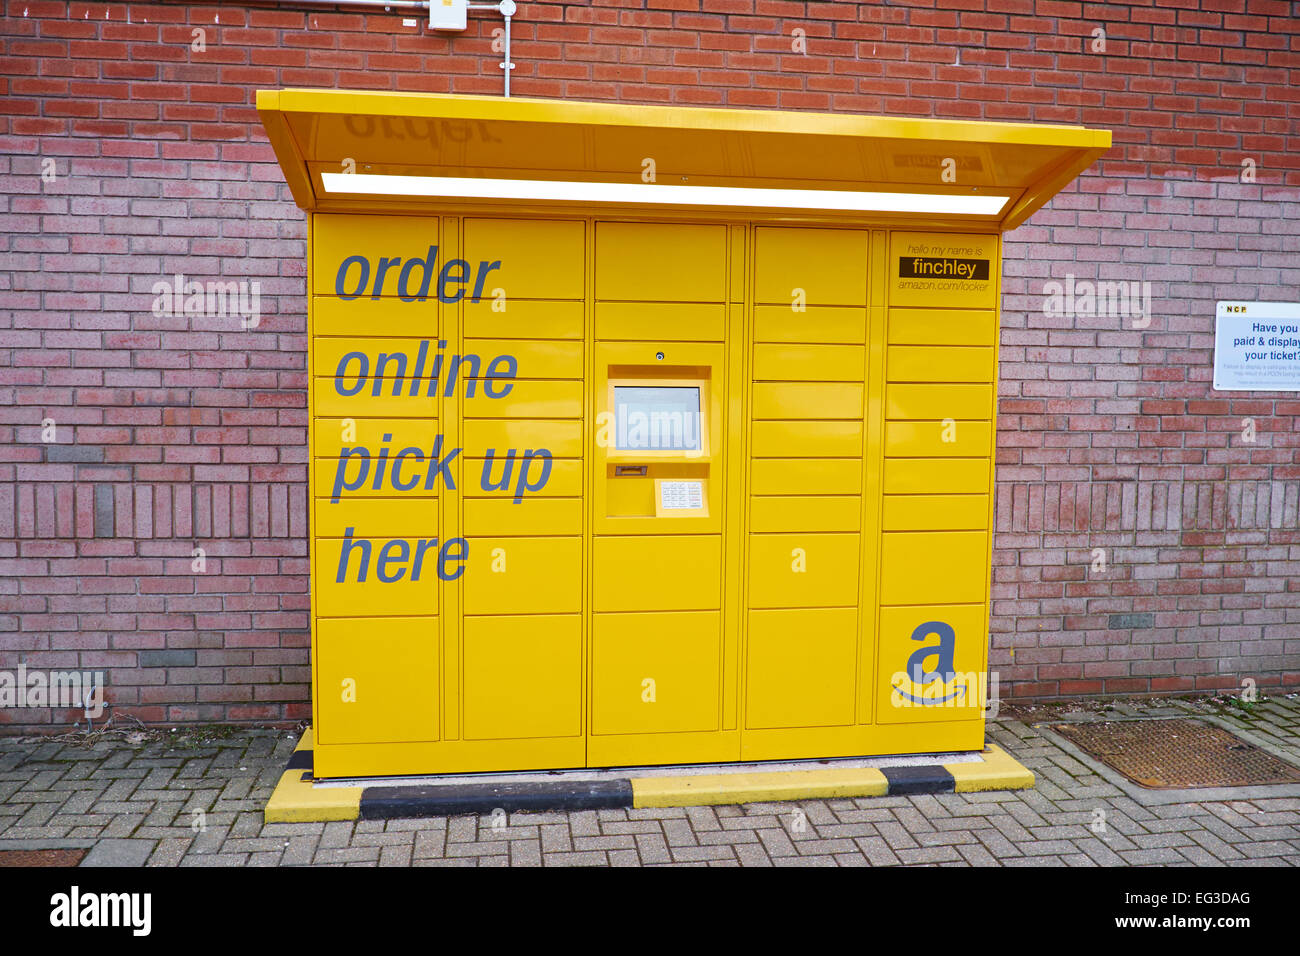 Amazon Locker High Resolution Stock Photography and Images - Alamy